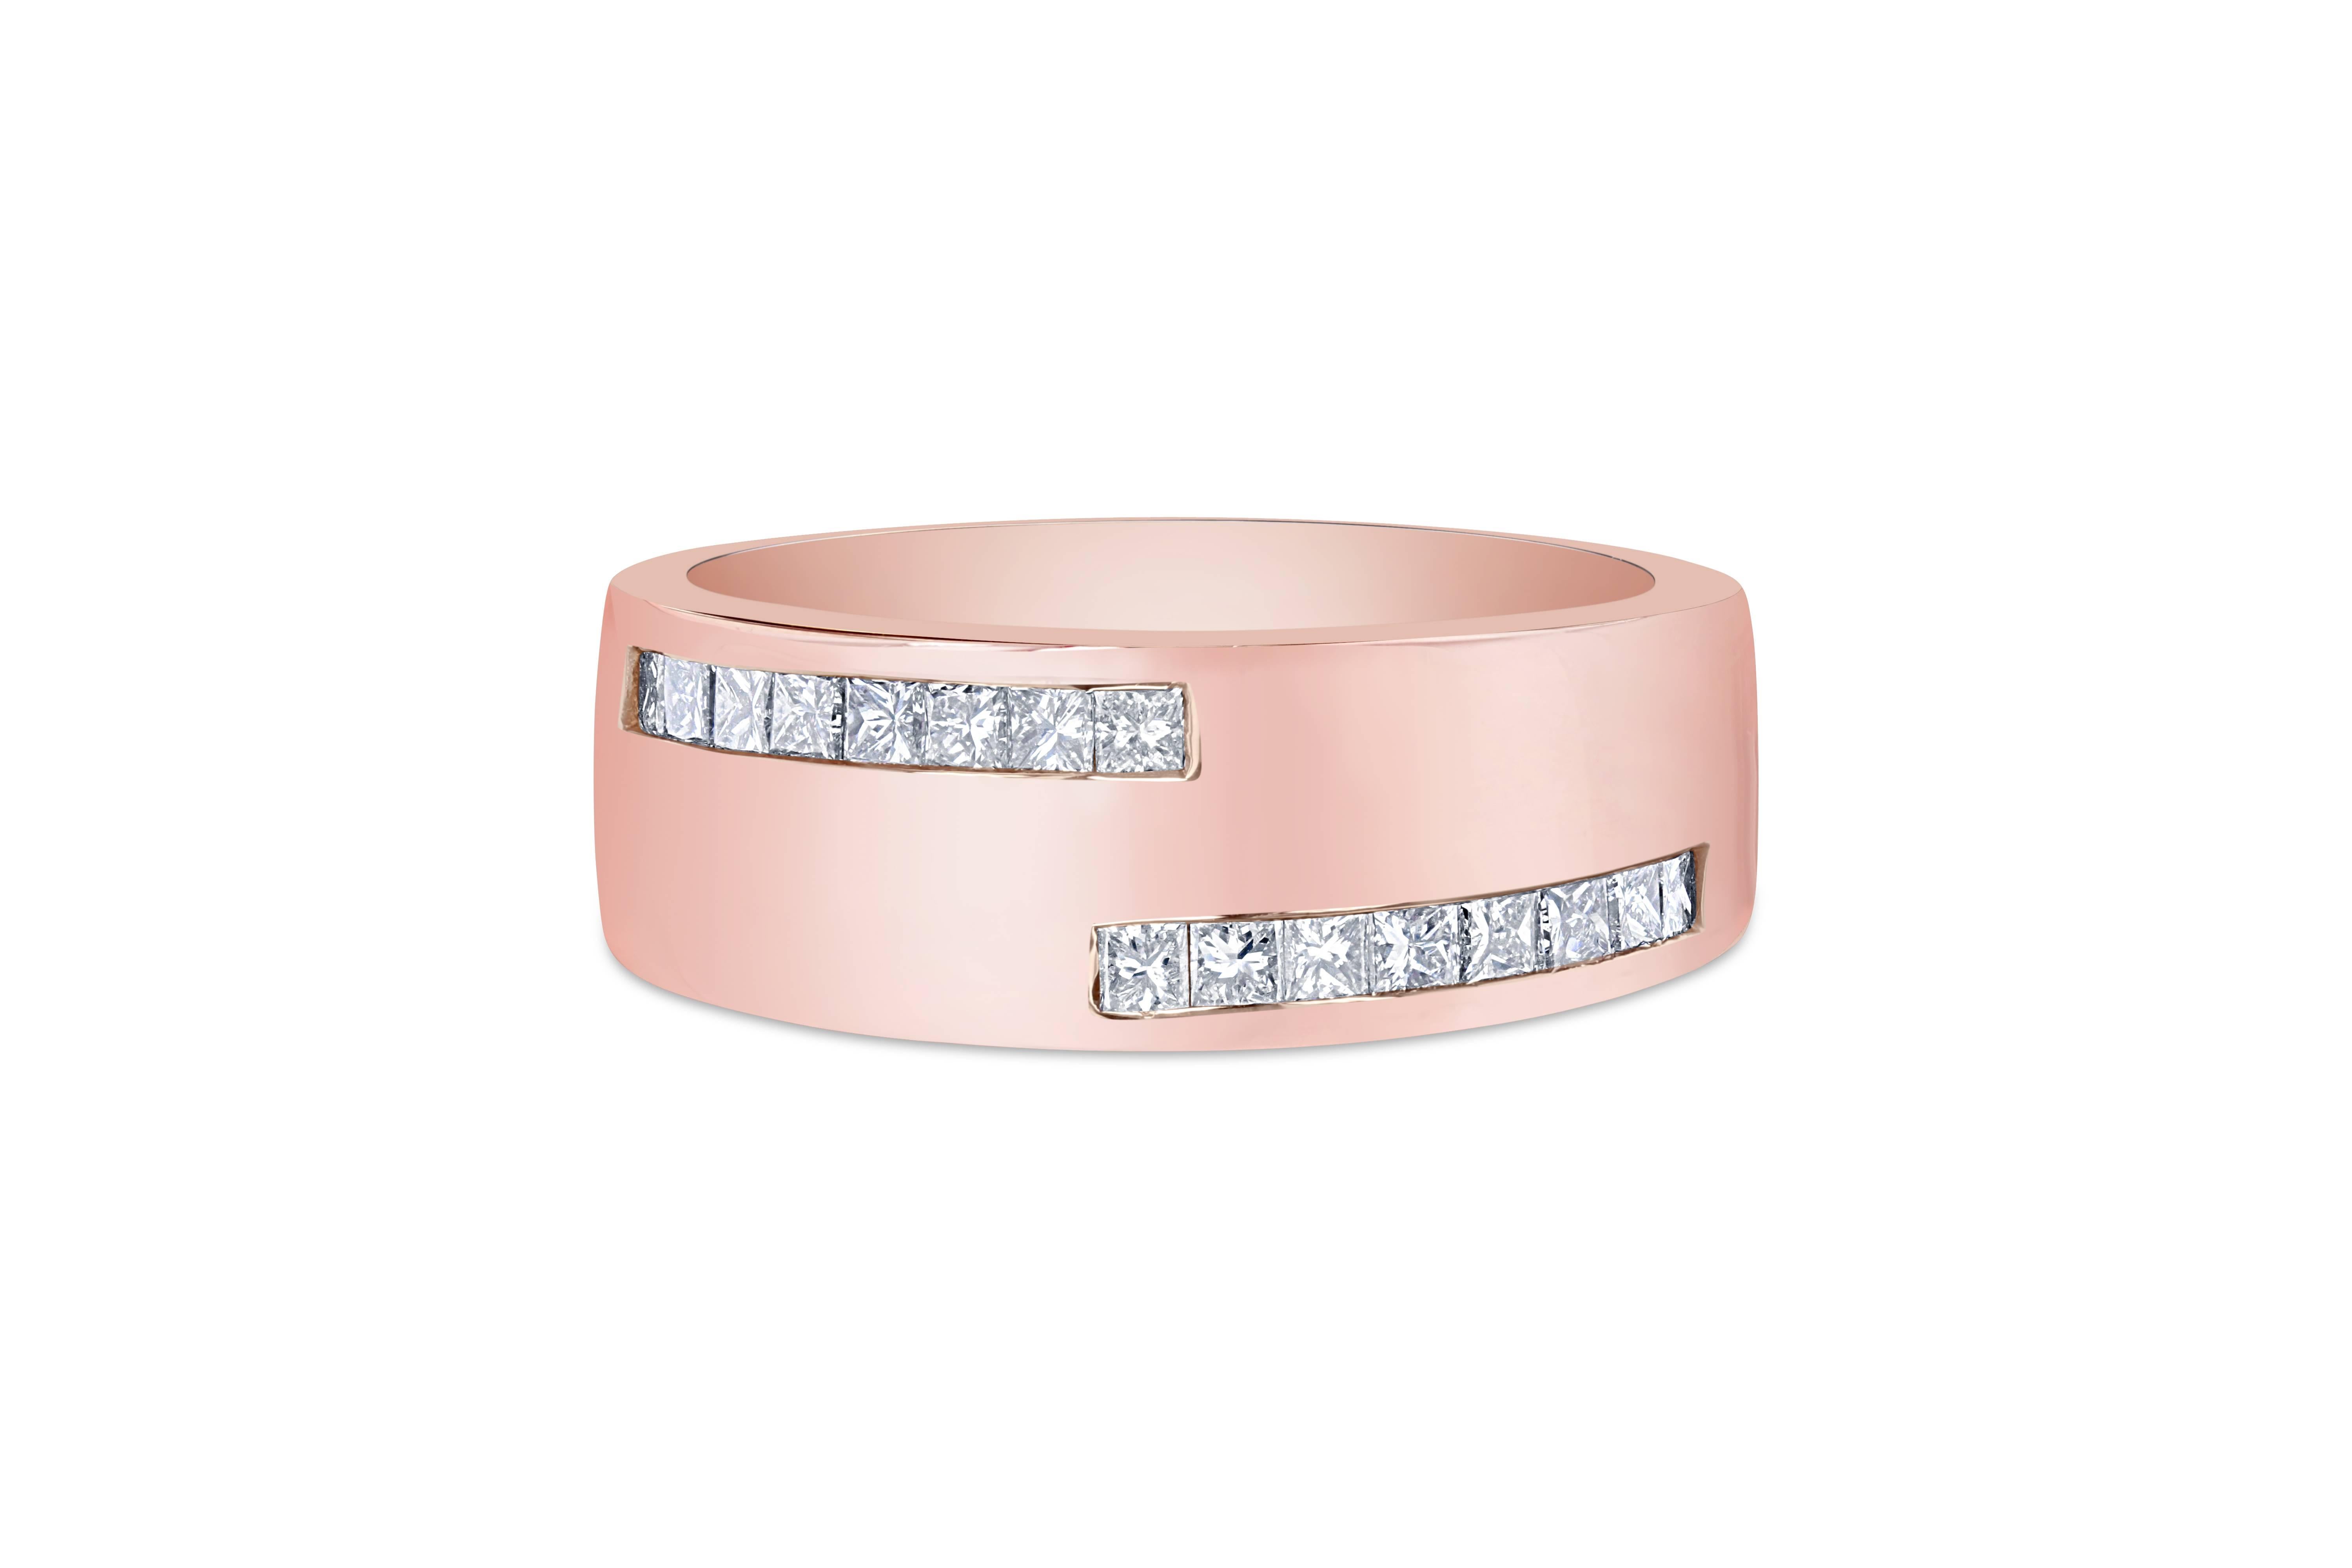 We also carry a Men's Collection!  
0.72 Carat Men's Diamond Rose Gold Wedding Band

This simple yet very unique Men's Band has 16 Princess Cut Diamonds that weigh 0.72 Carats. It is beautifully crafted in 14K Rose Gold and is 14.2 grams. The metal